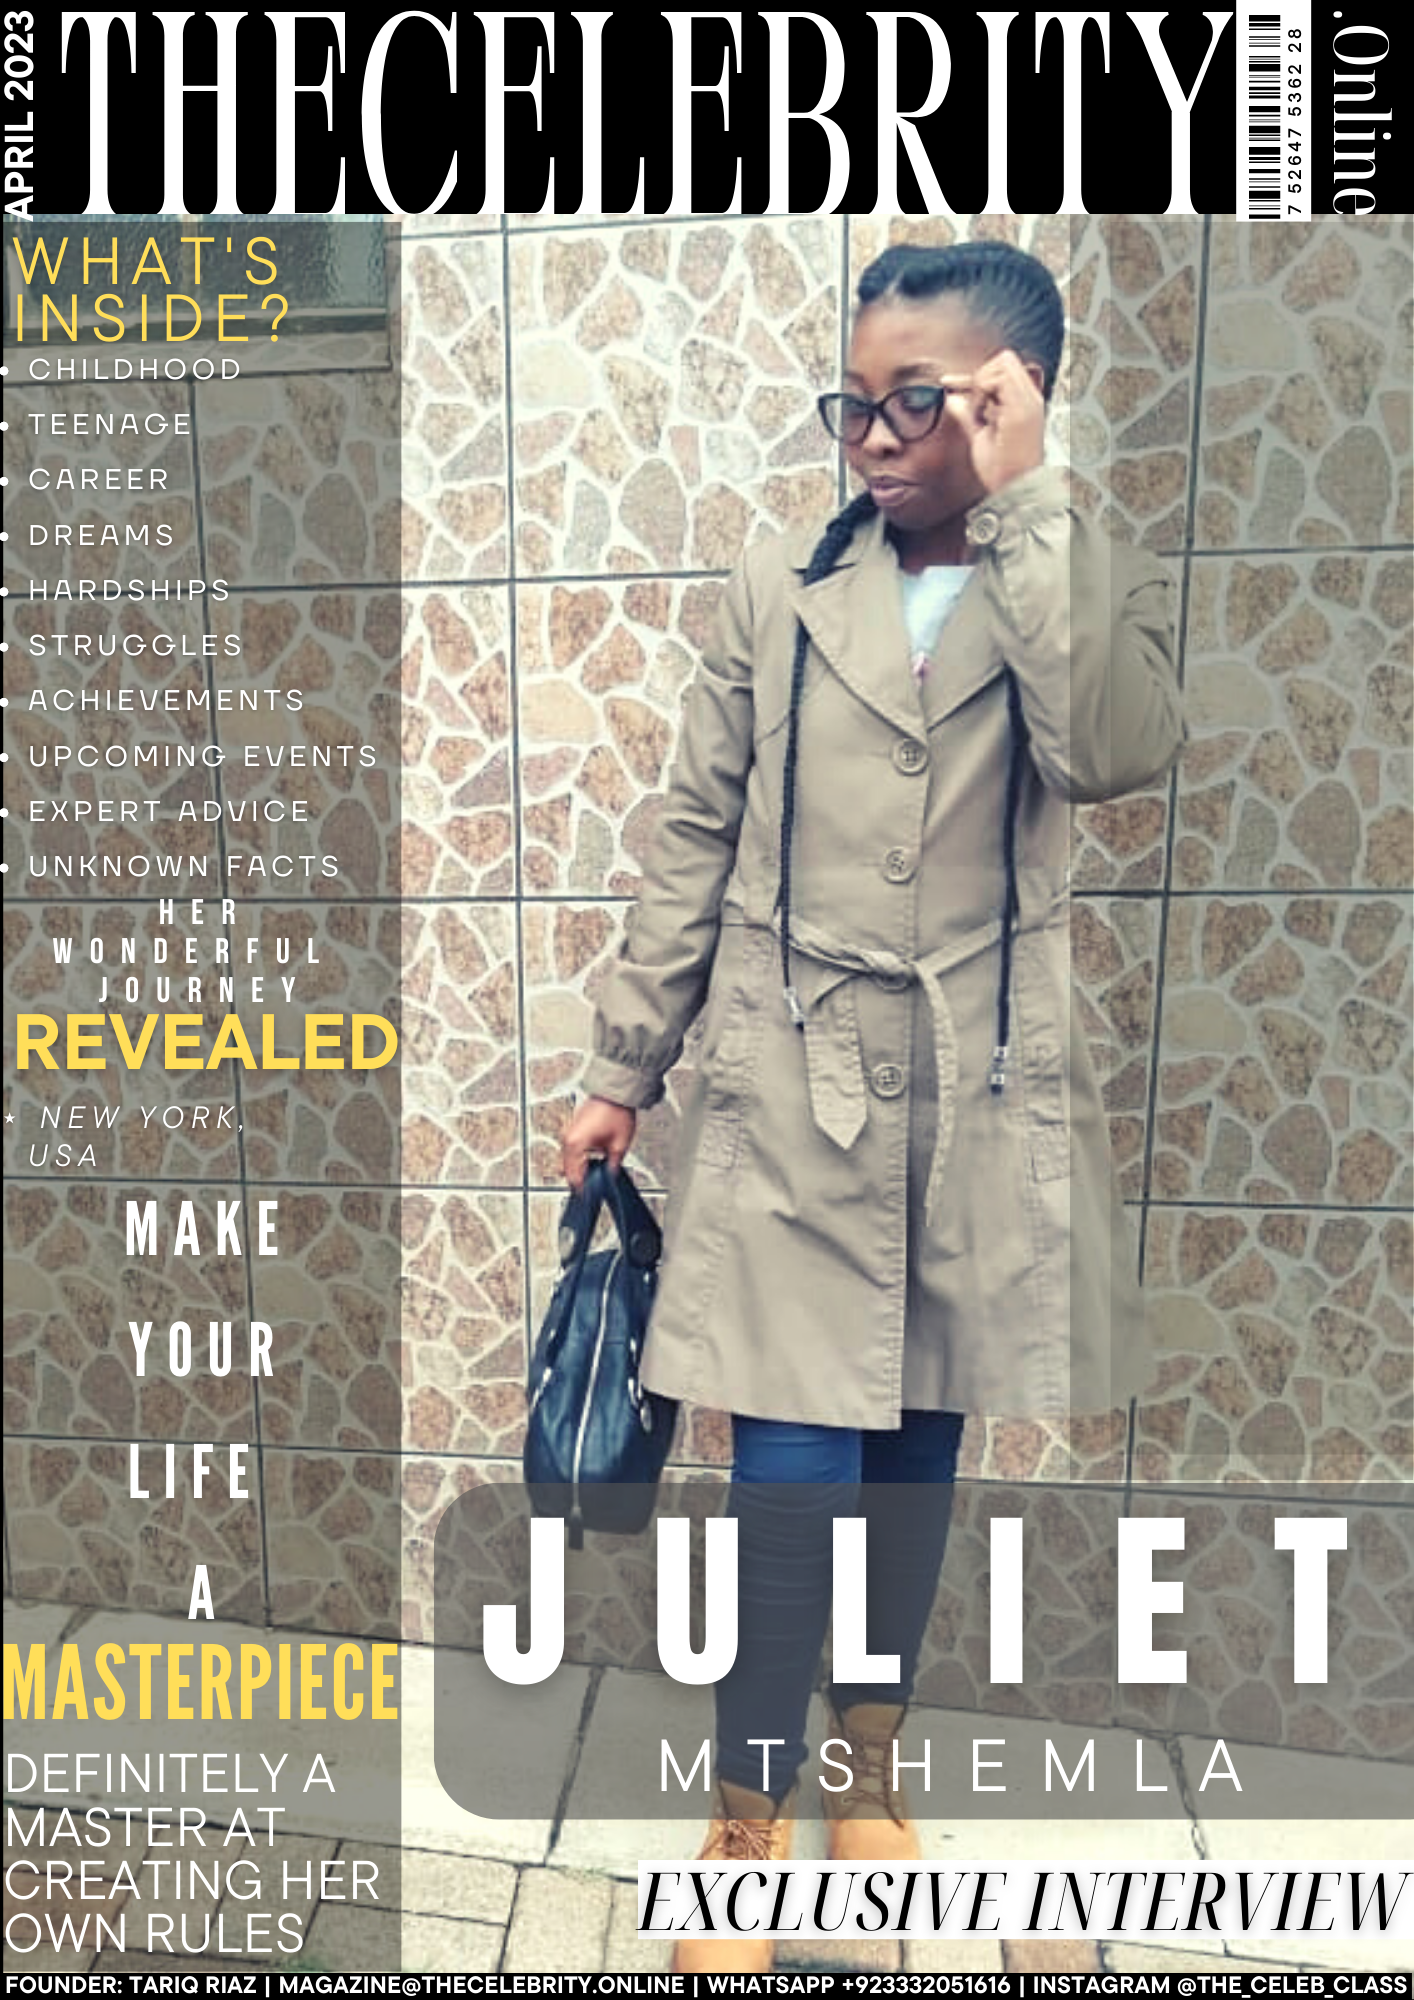 Juliet Mtshemla Exclusive Cover Interview – ‘We were not rich, but life was perfect for us’